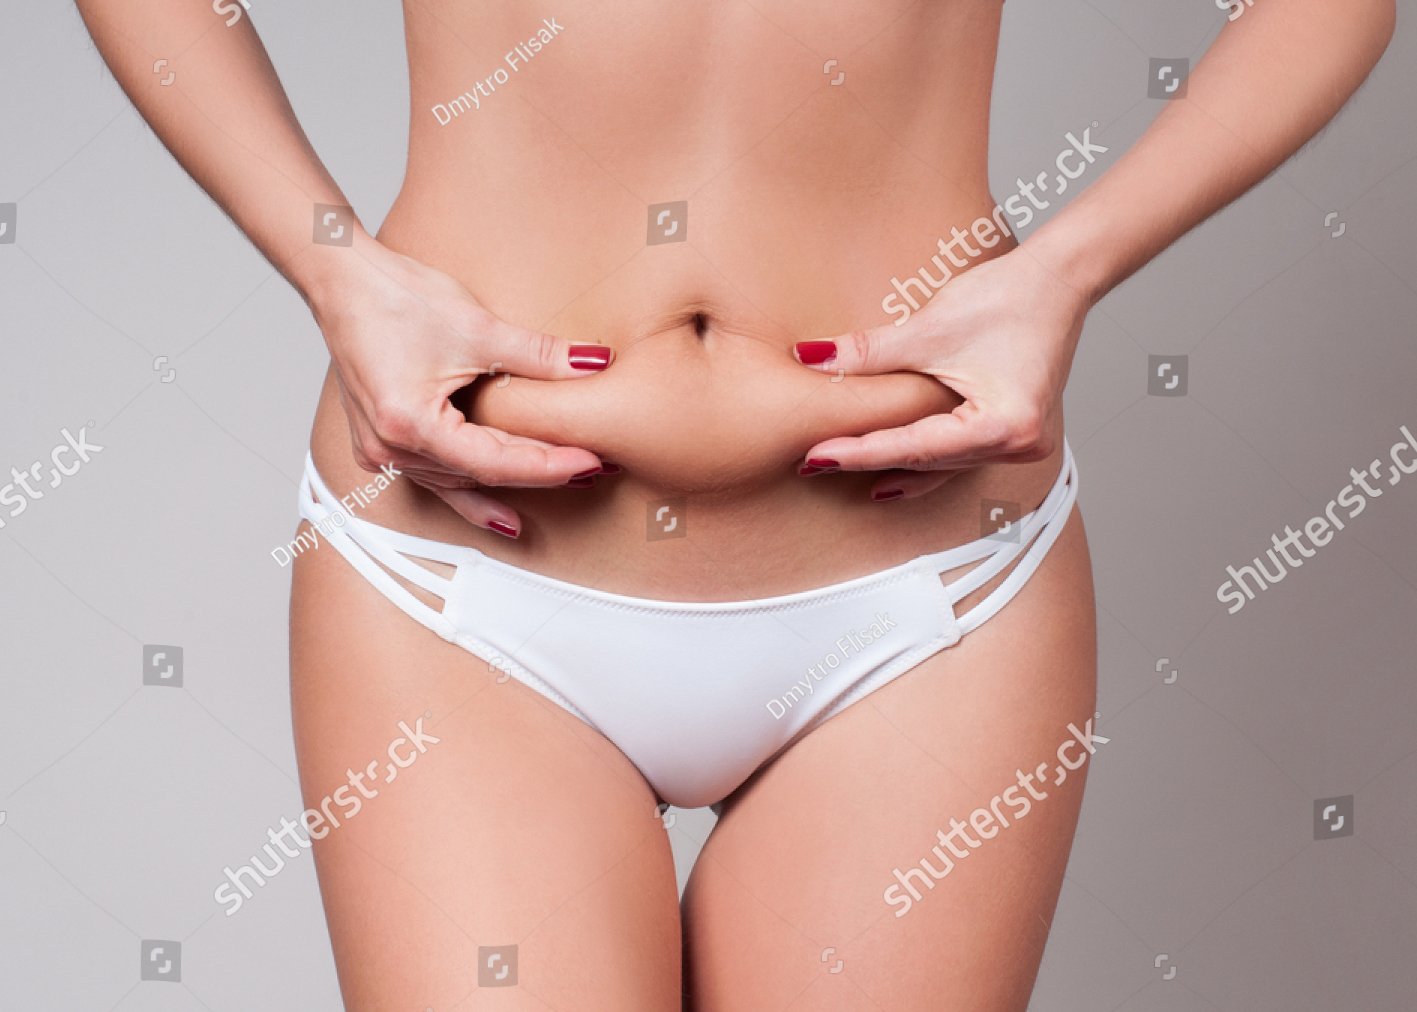 stock-photo-fat-female-belly-woman-holding-her-skin-for-cellulite-check-getting-rid-of-belly-fat-and-weight-773024251